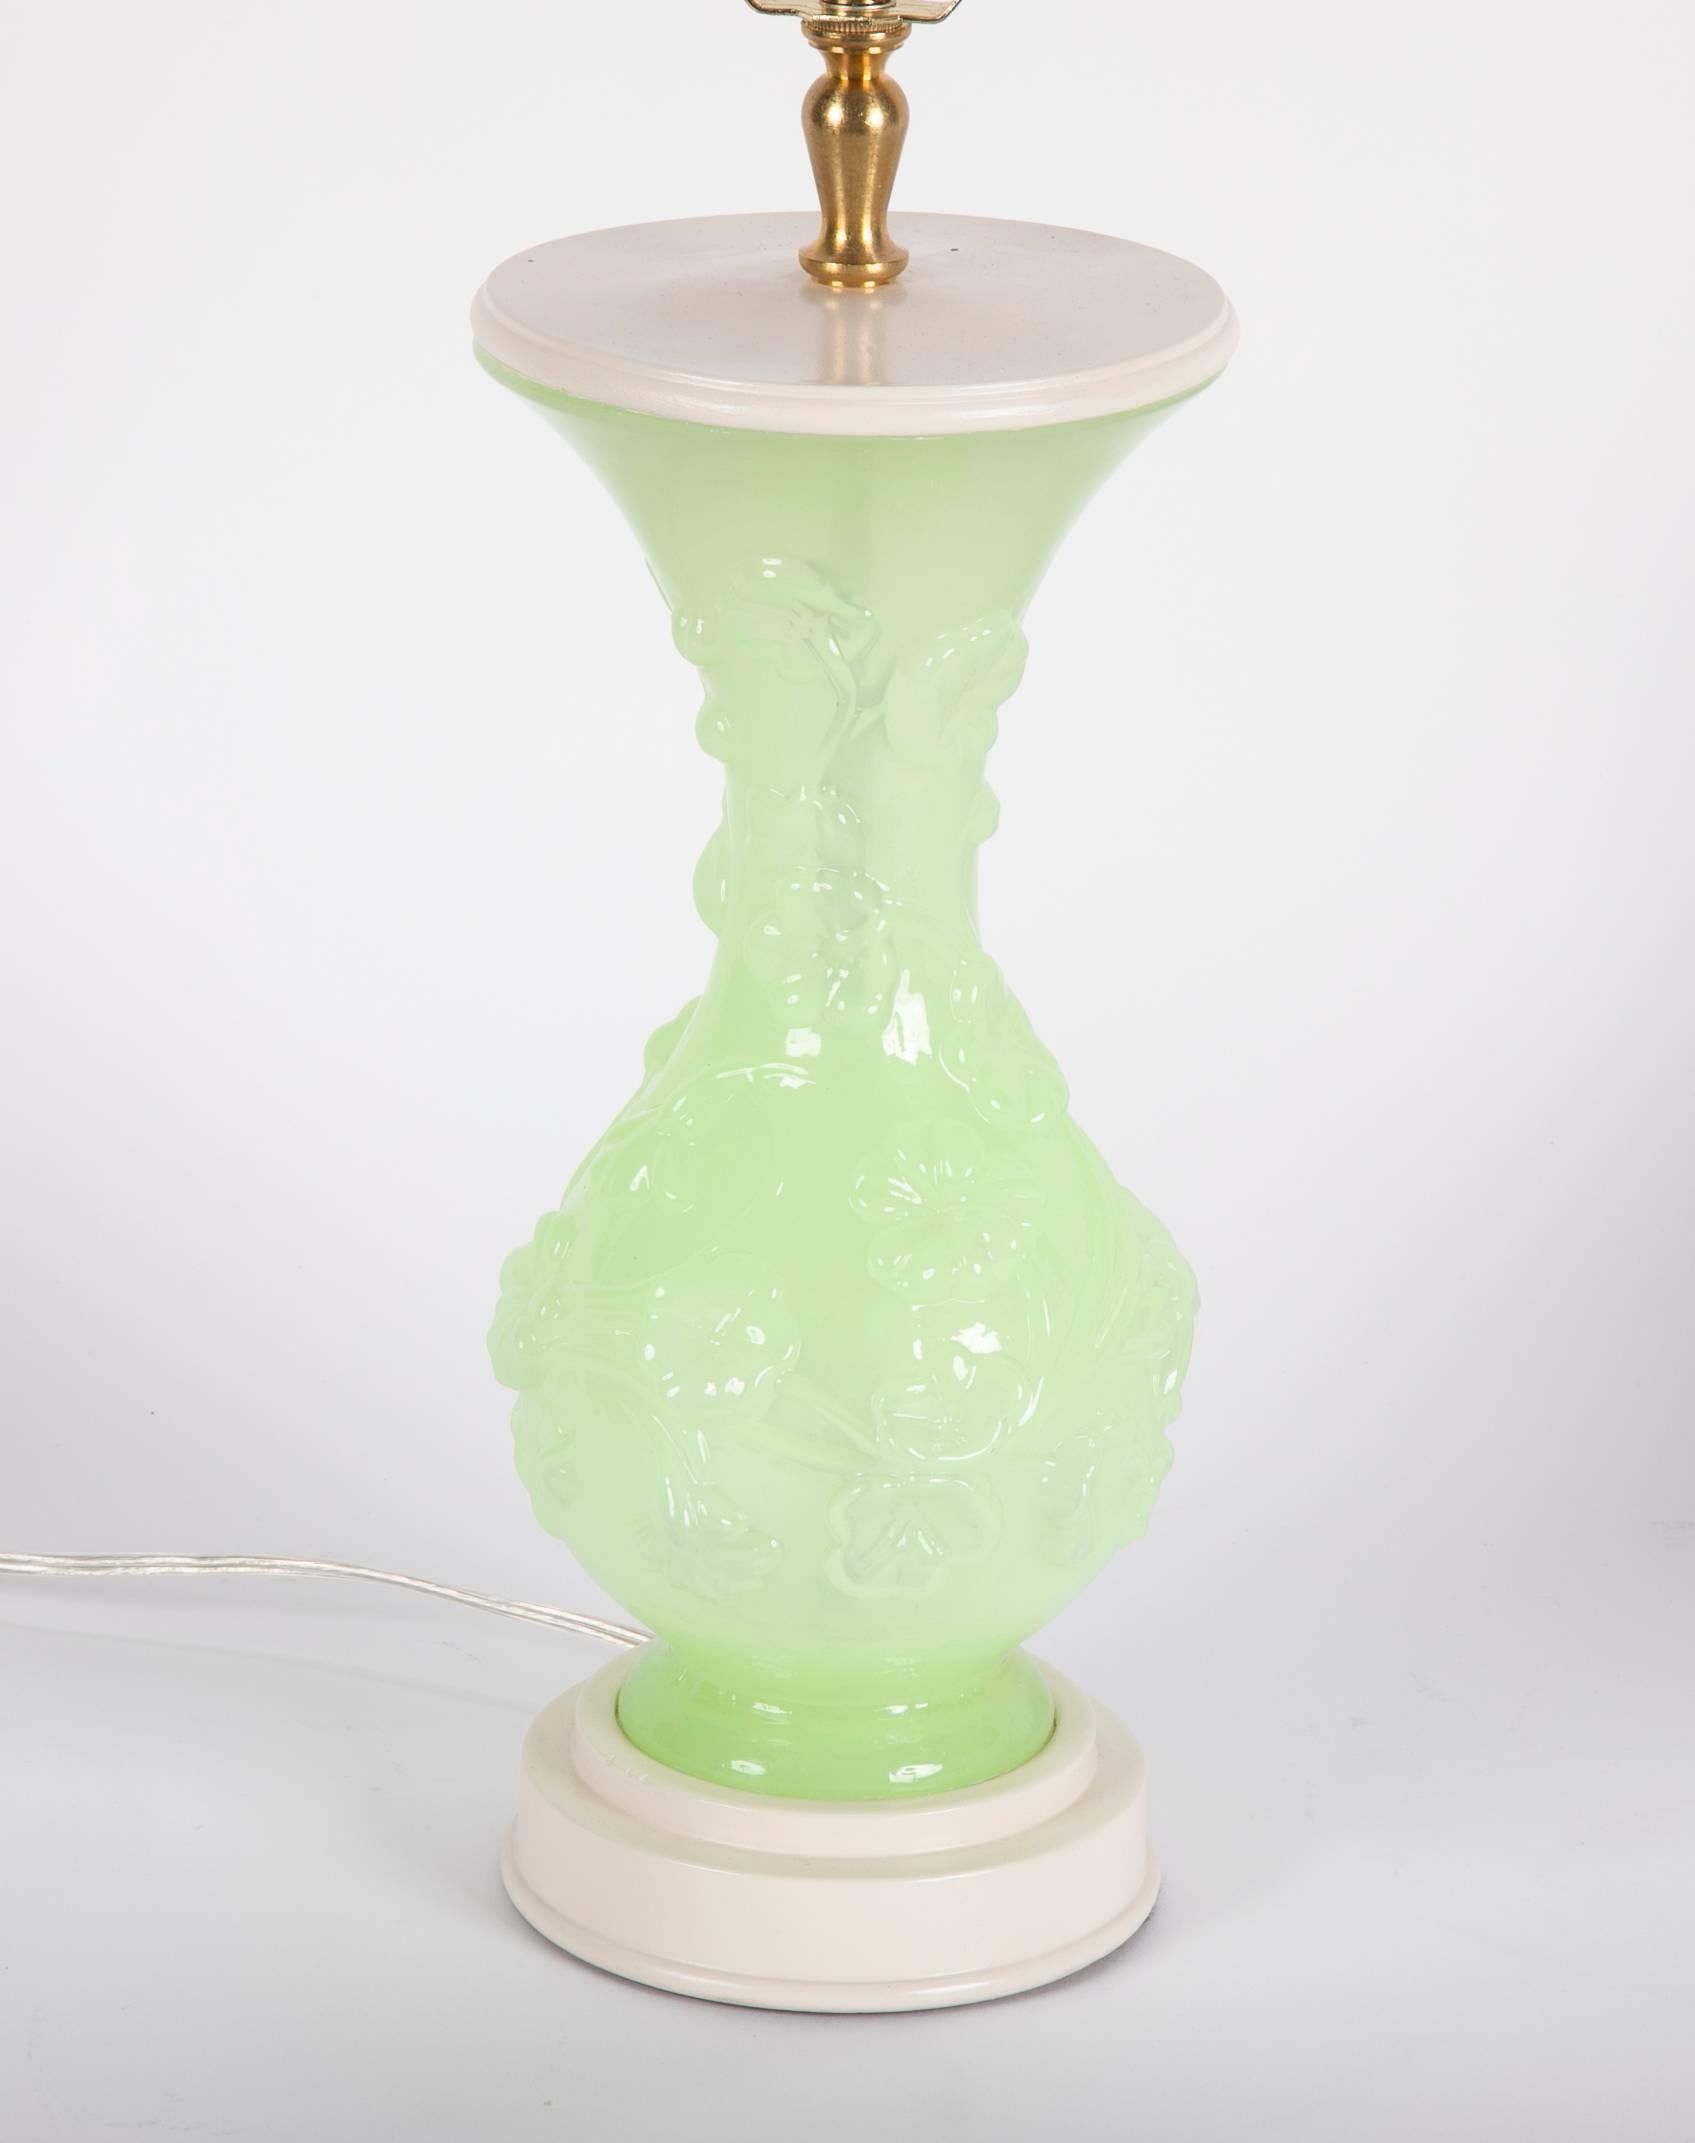 American Pressed Glass Vases now Table Lamps For Sale 4